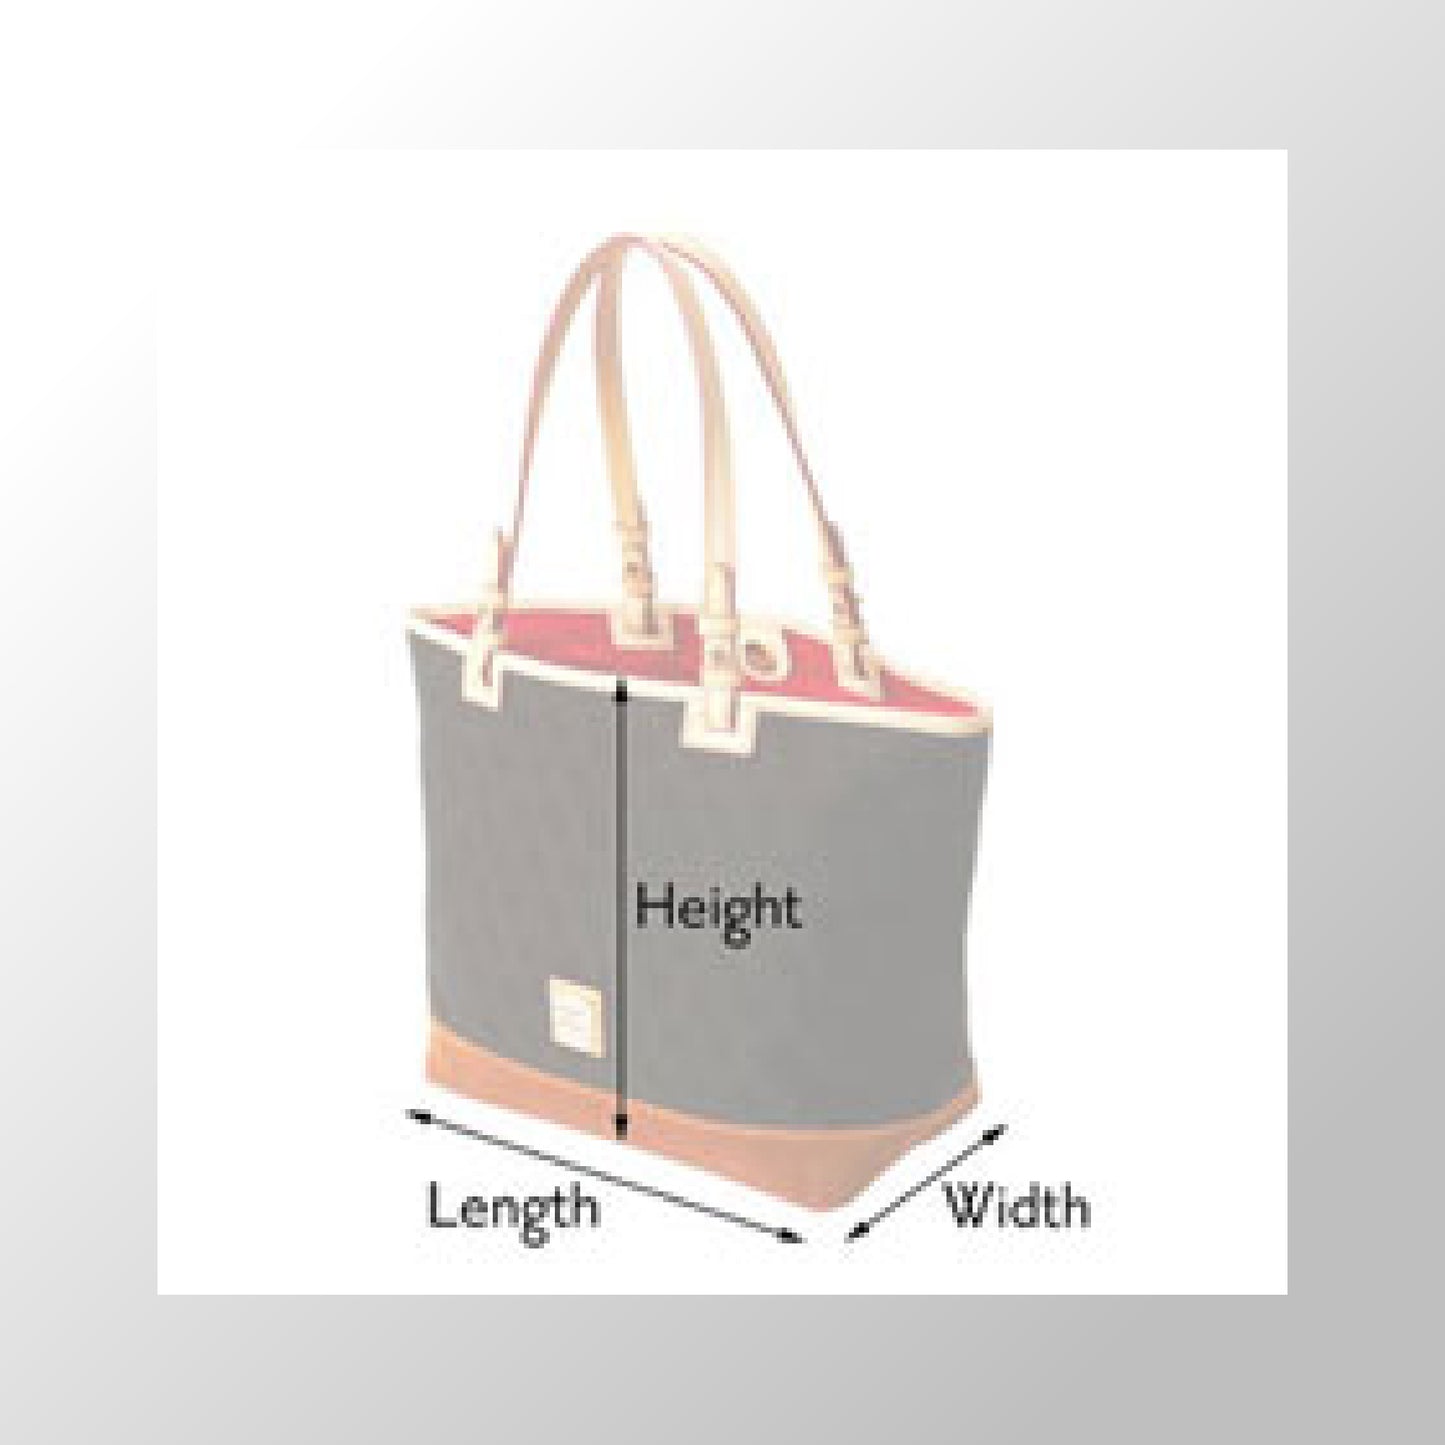 Diagram for how a tote is measured